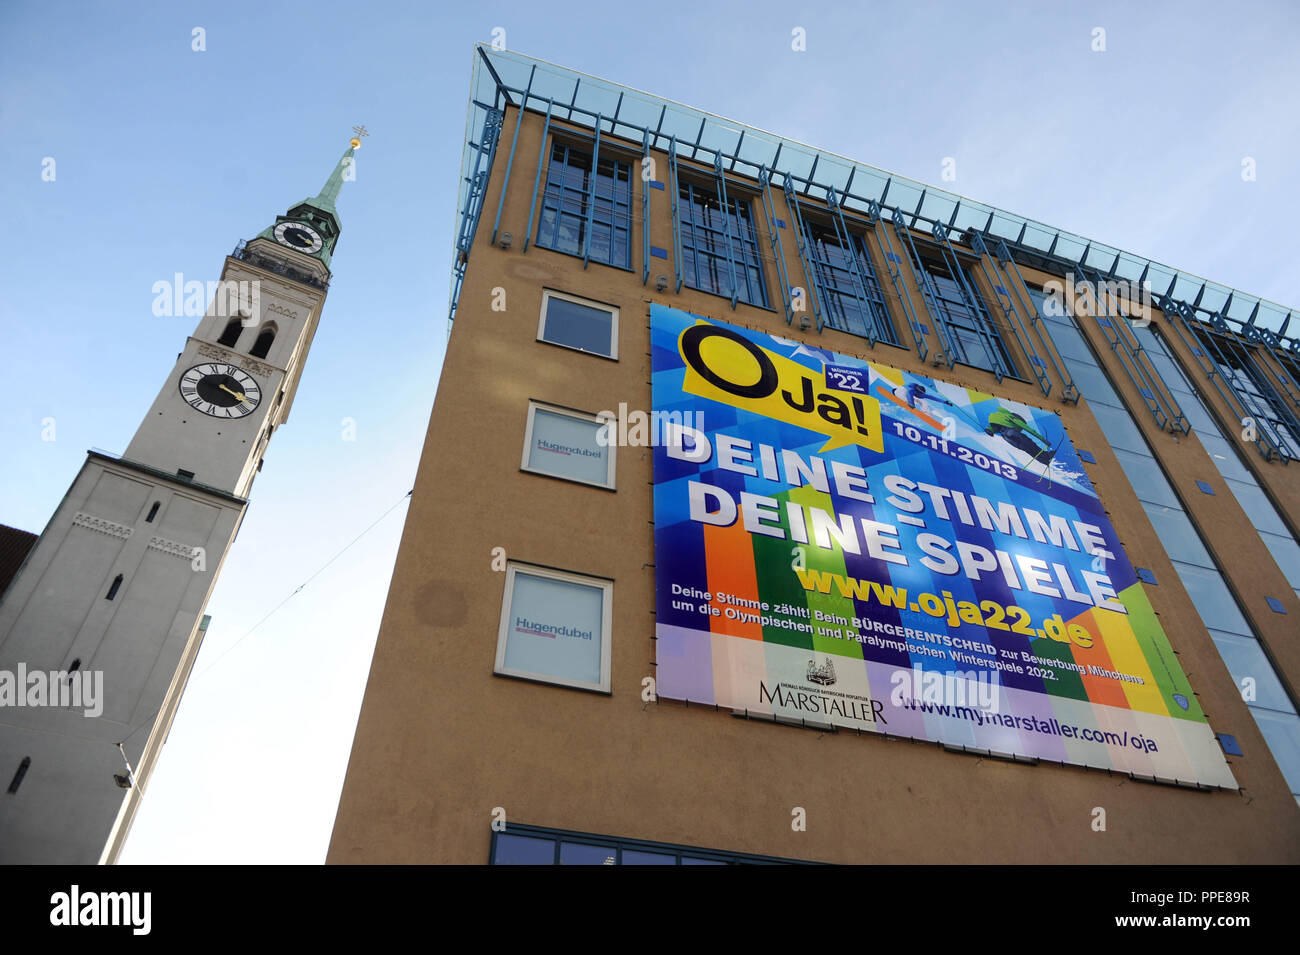 Unveiling of the pro-Olympic poster for the referendum on the bid for the 2022 Winter Olympics on the Hugendubel-Haus in Munich's Marienplatz. Left the Old Peter. Stock Photo